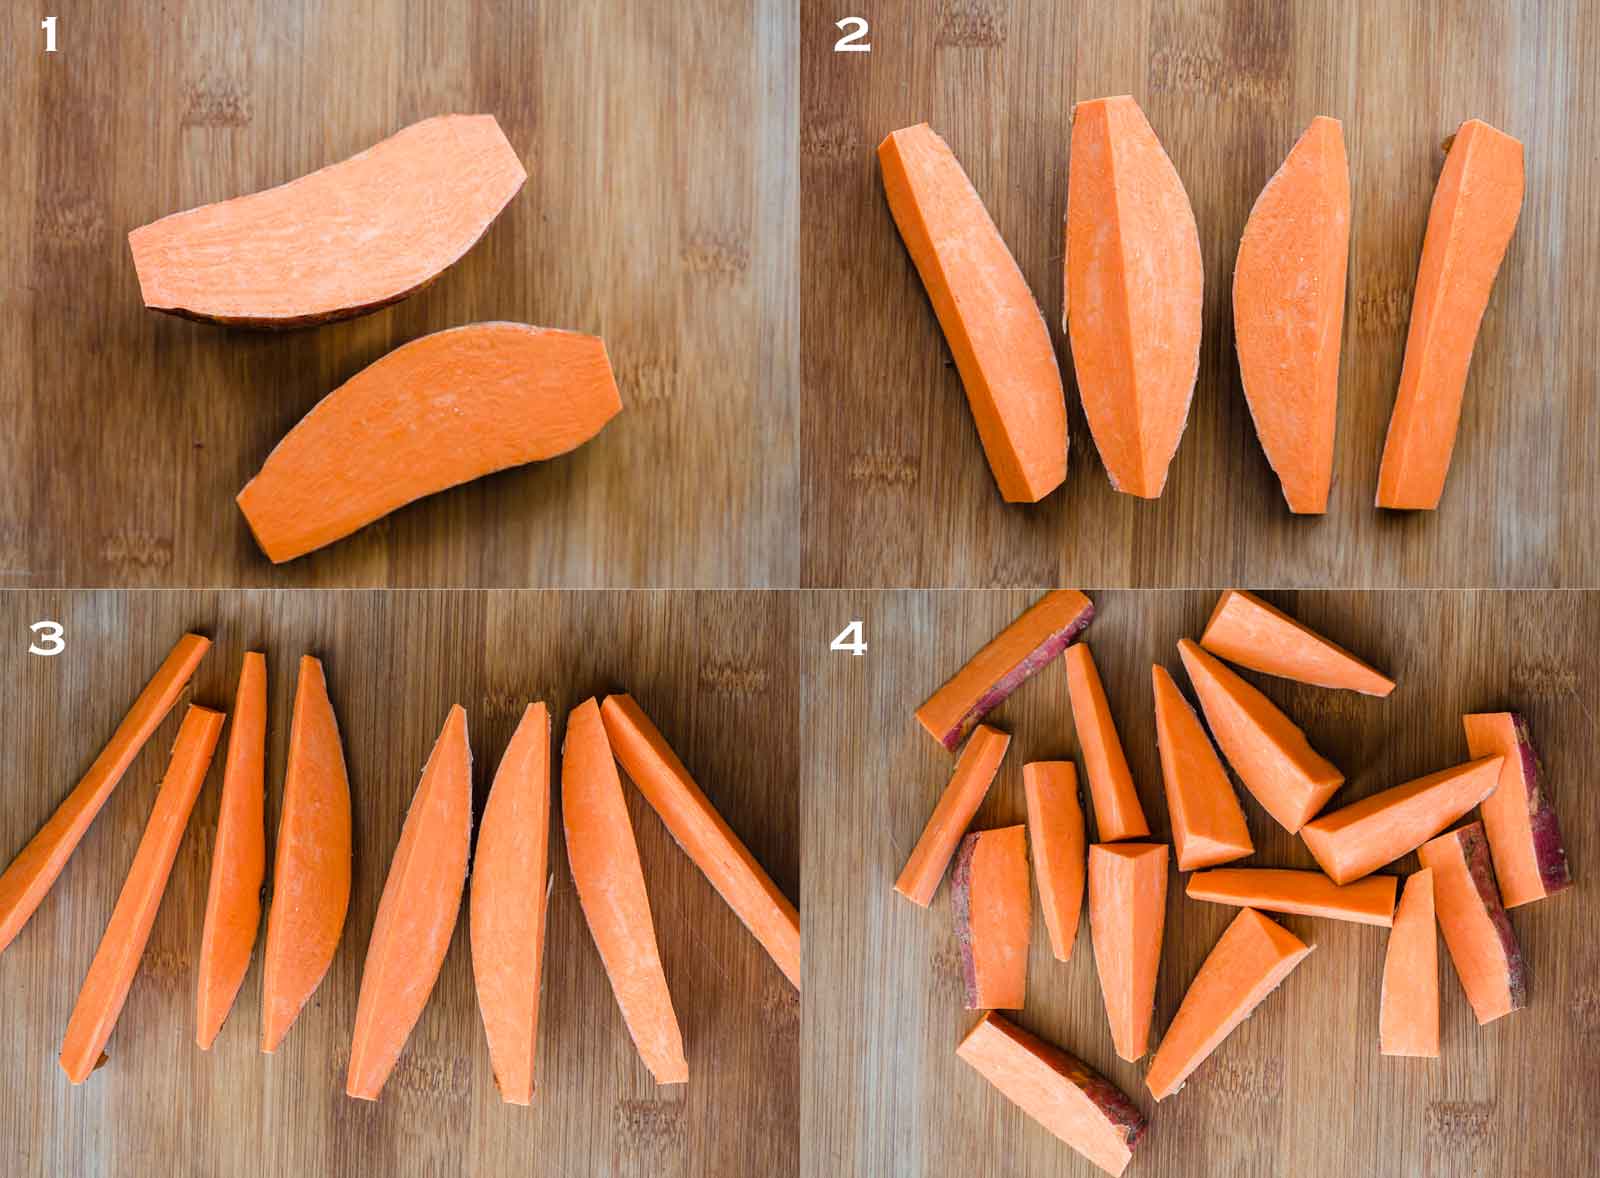 How to cut sweet potato into wedges - step by step instructions